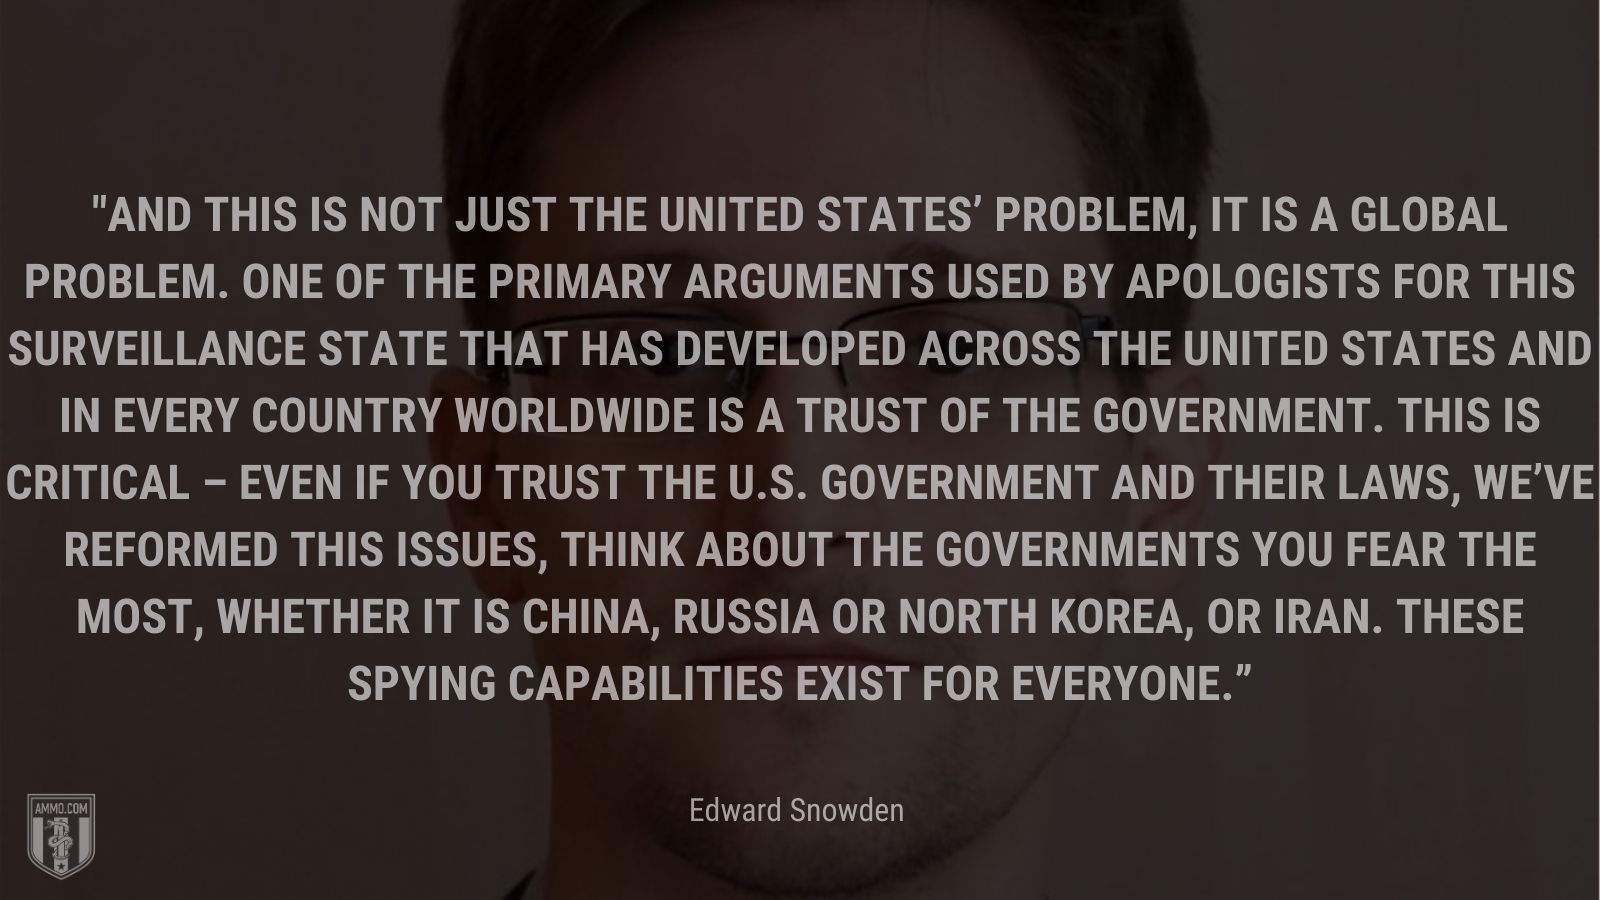 “And this is not just the United States’ problem, it is a global problem. One of the primary arguments used by apologists for this surveillance state that has developed across the United States and in every country worldwide is a trust of the government. This is critical – even if you trust the U.S. government and their laws, we’ve reformed this issues, think about the governments you fear the most, whether it is China, Russia or North Korea, or Iran. These spying capabilities exist for everyone.” - Edward Snowden